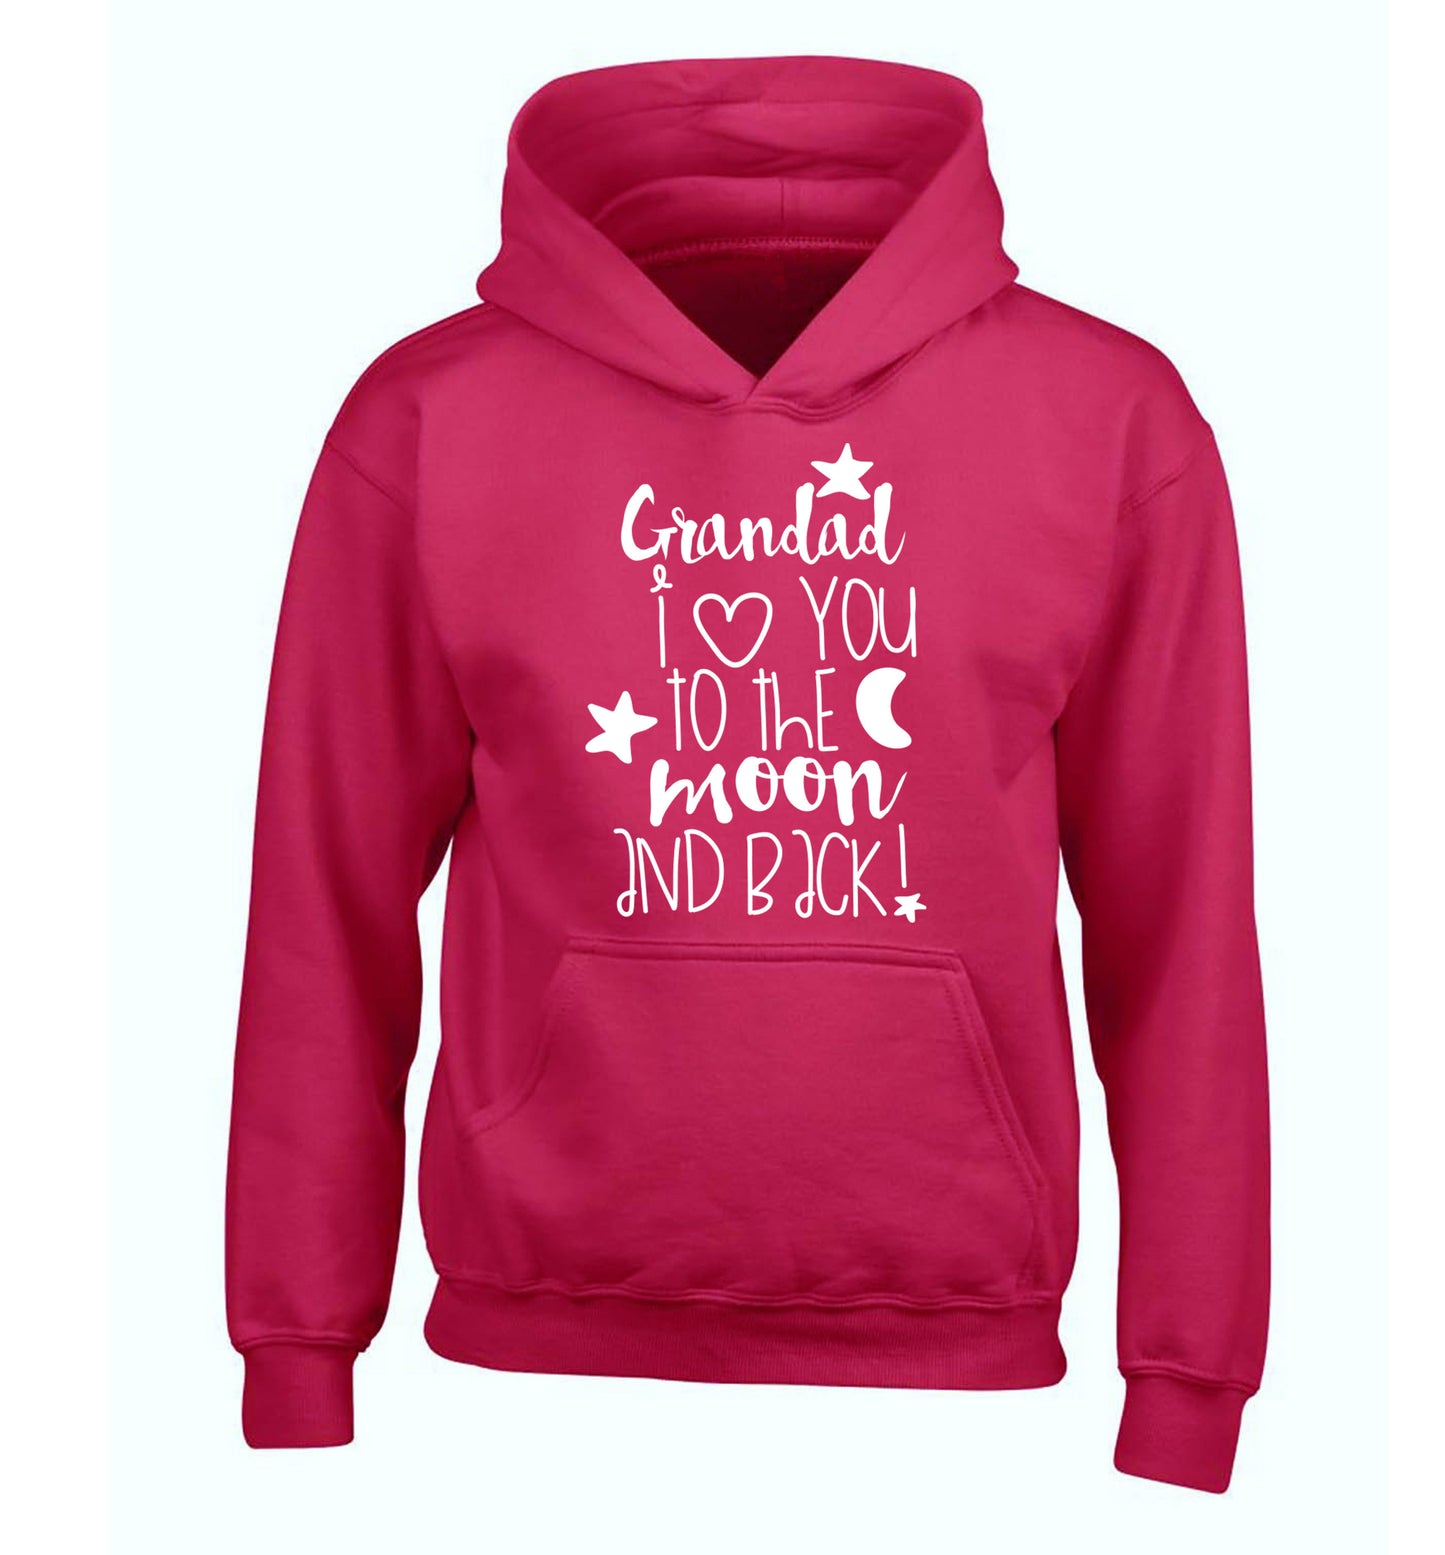 Grandad's I love you to the moon and back children's pink hoodie 12-14 Years